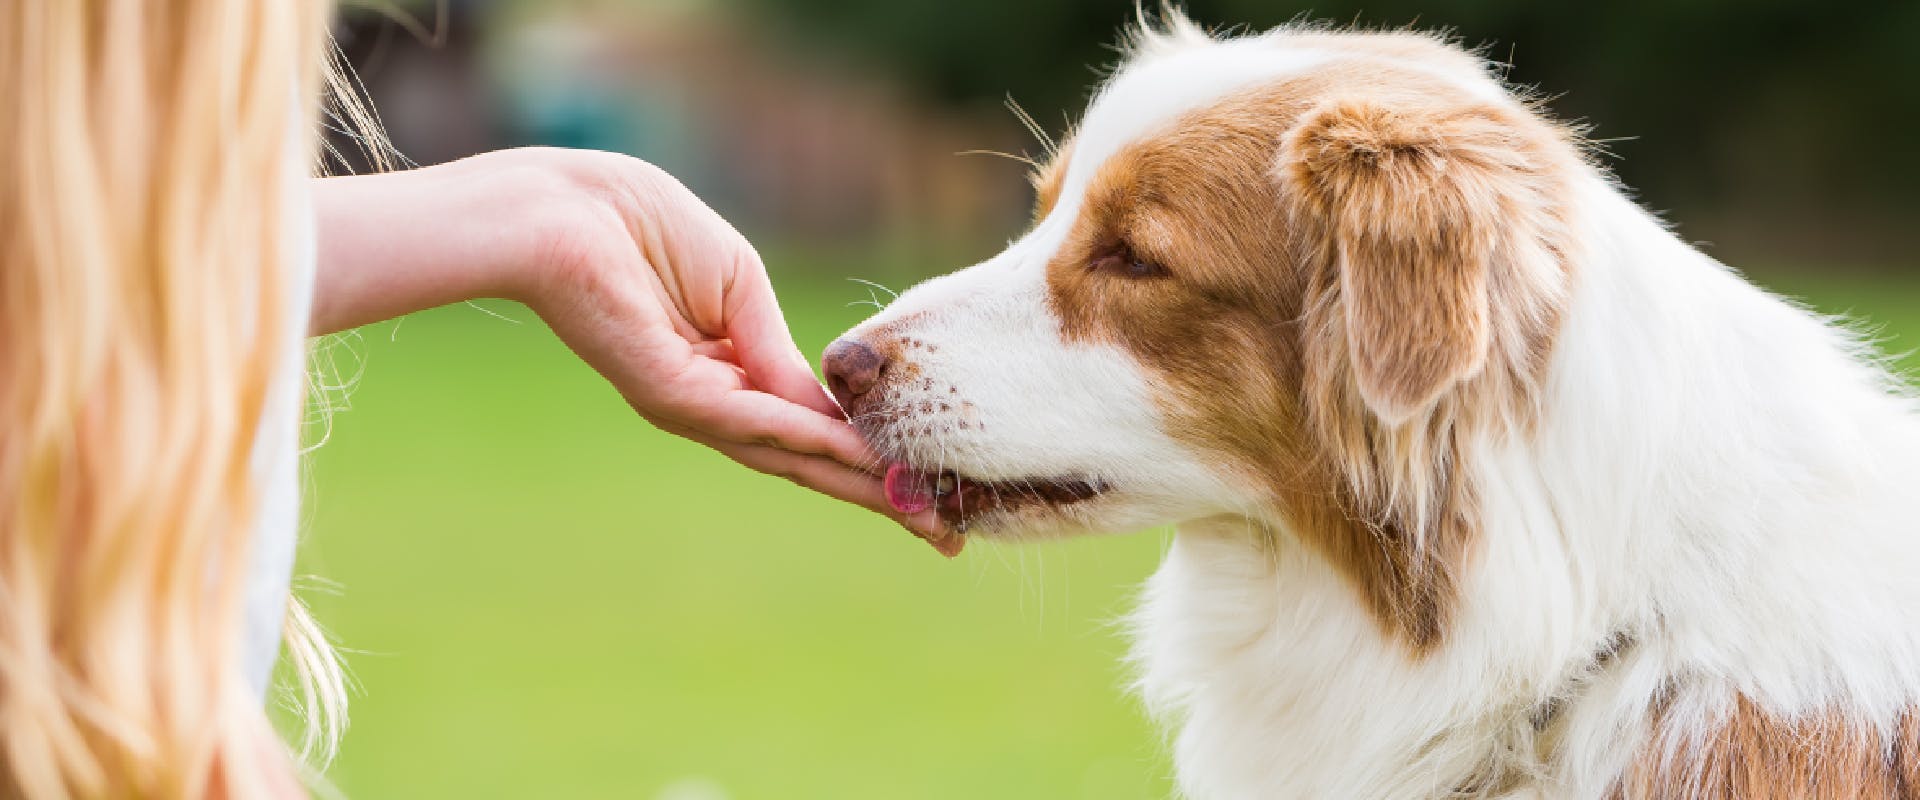 A dog eats a treat from someone's hand.